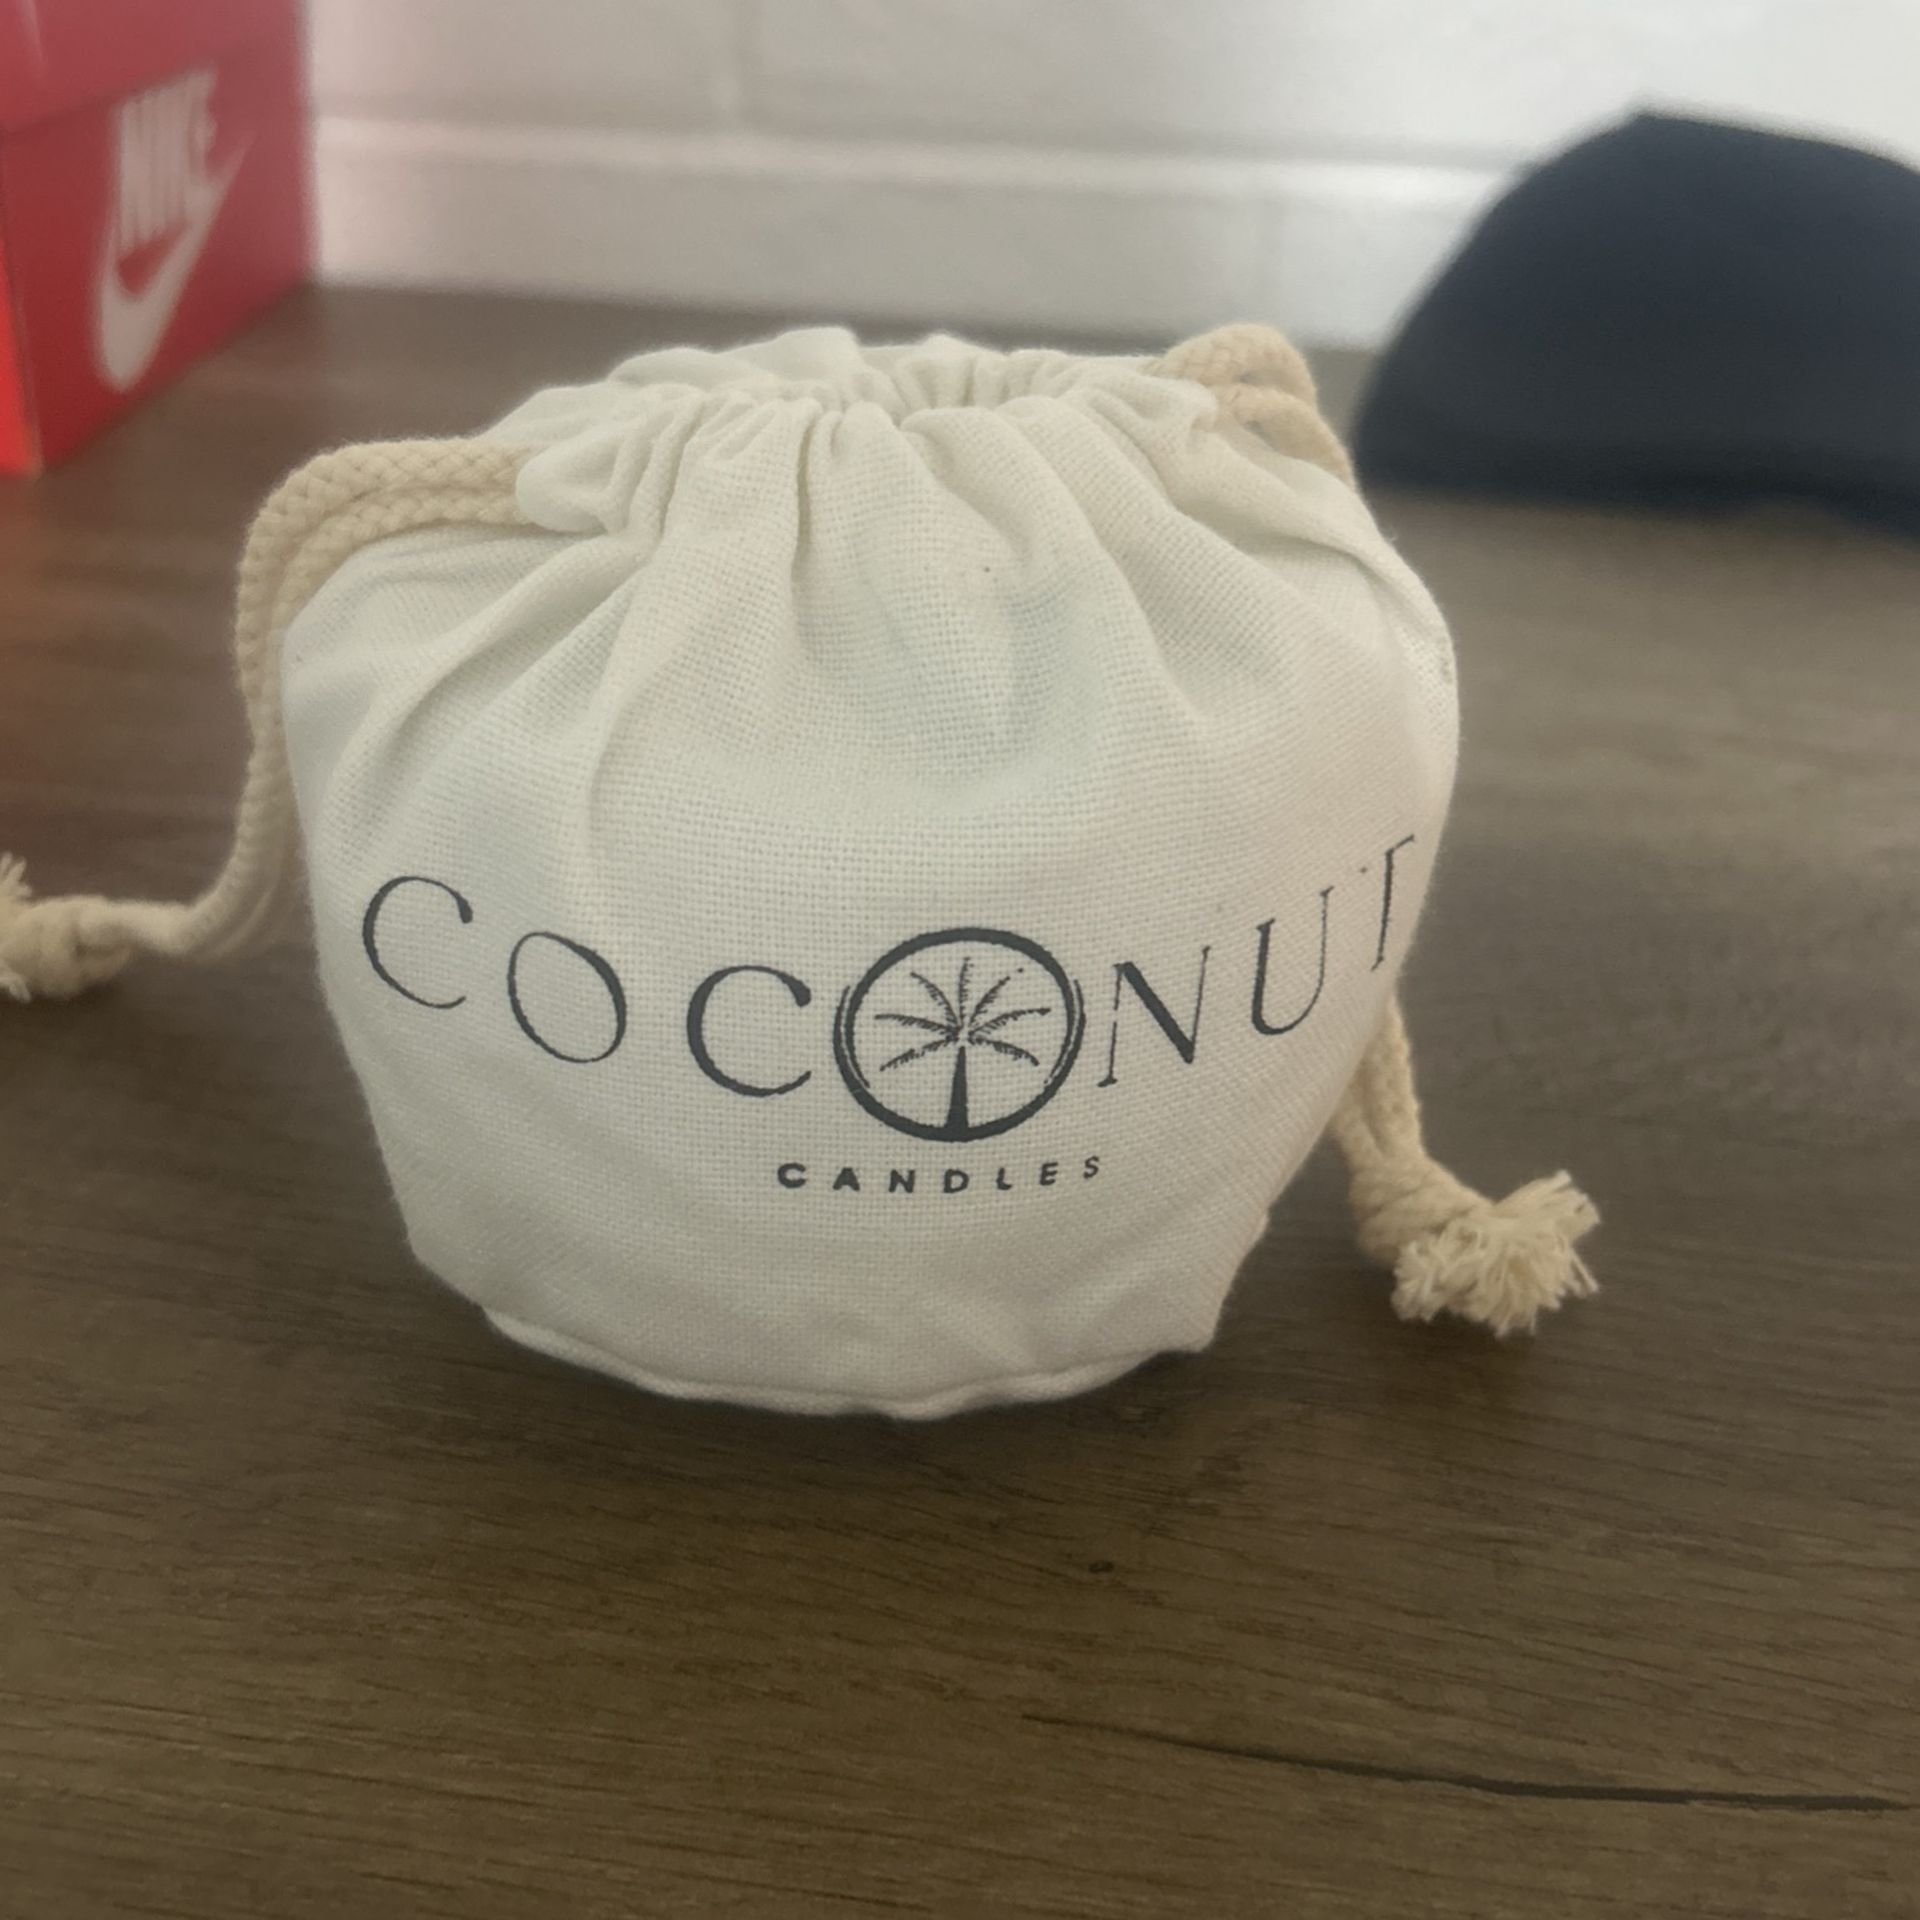  New Coconut Candles